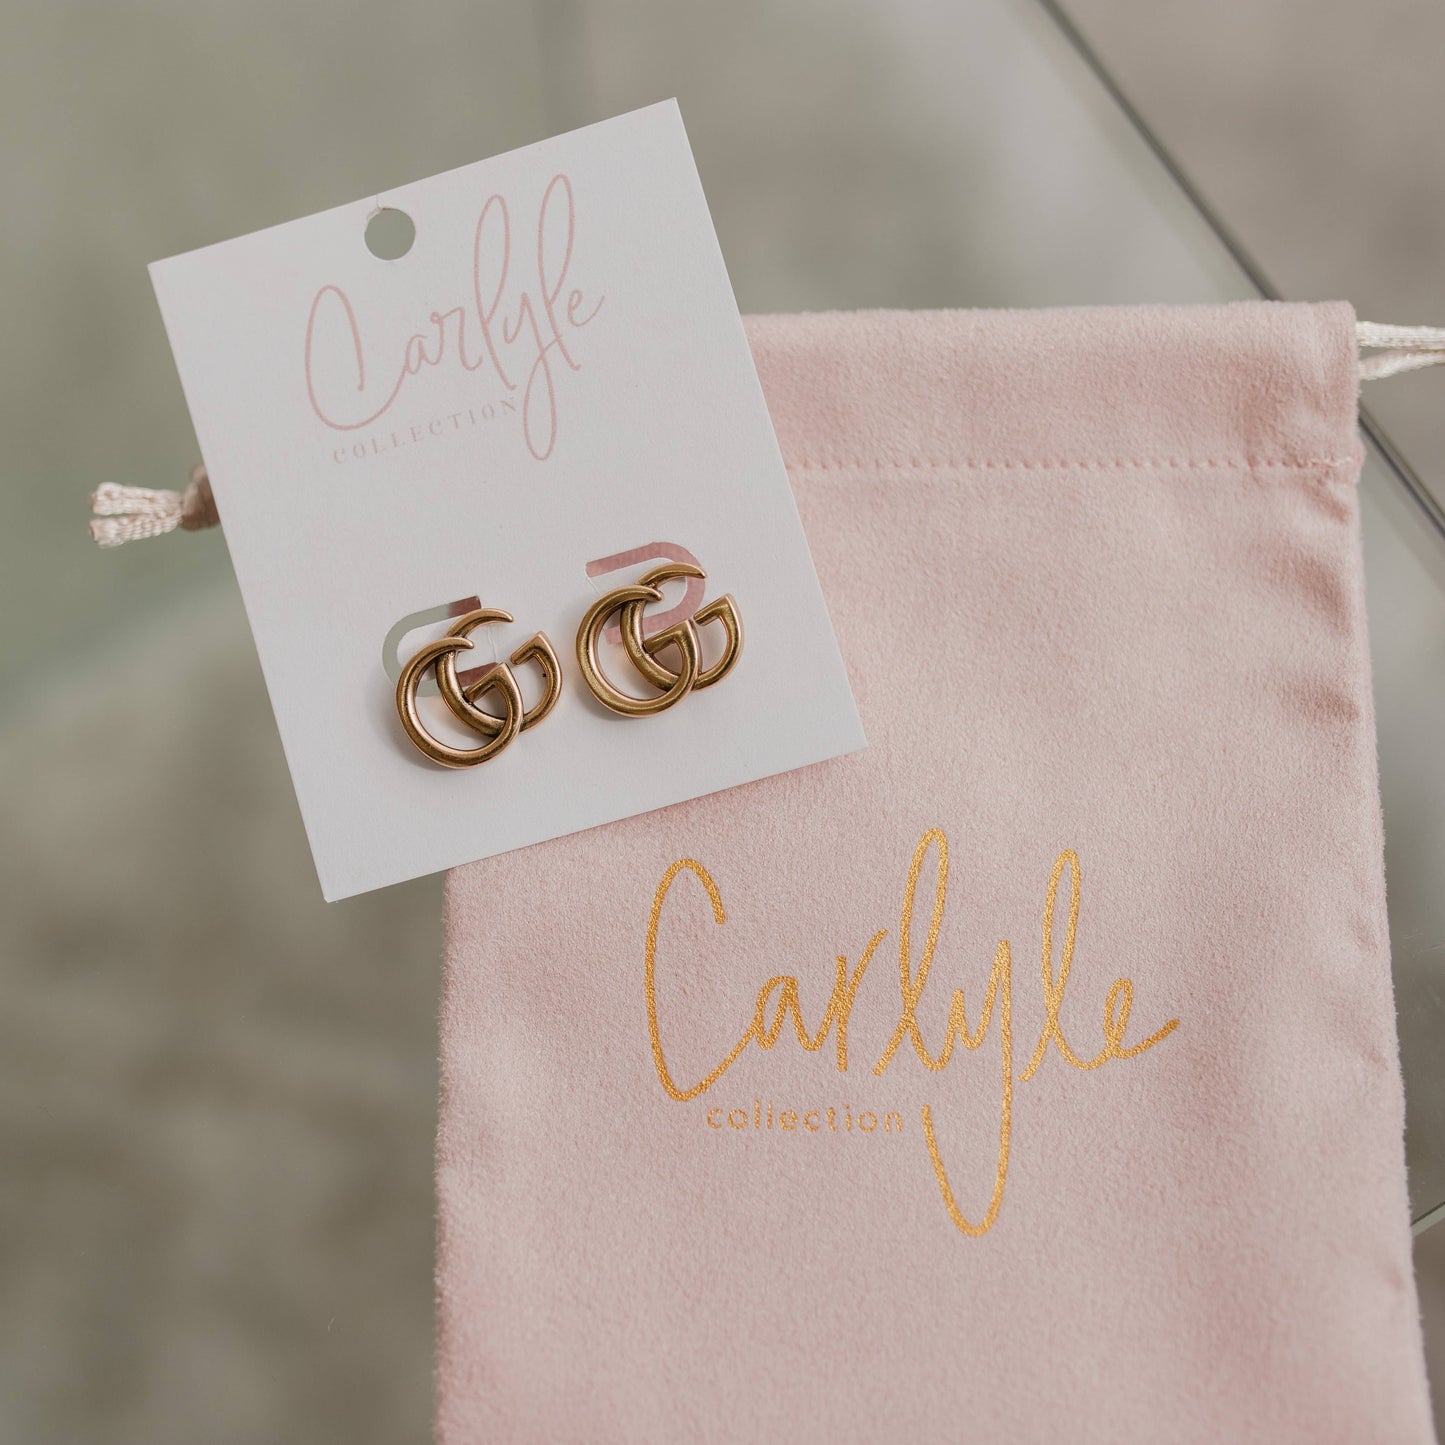 Carlyle Collection - GG Earring Studs